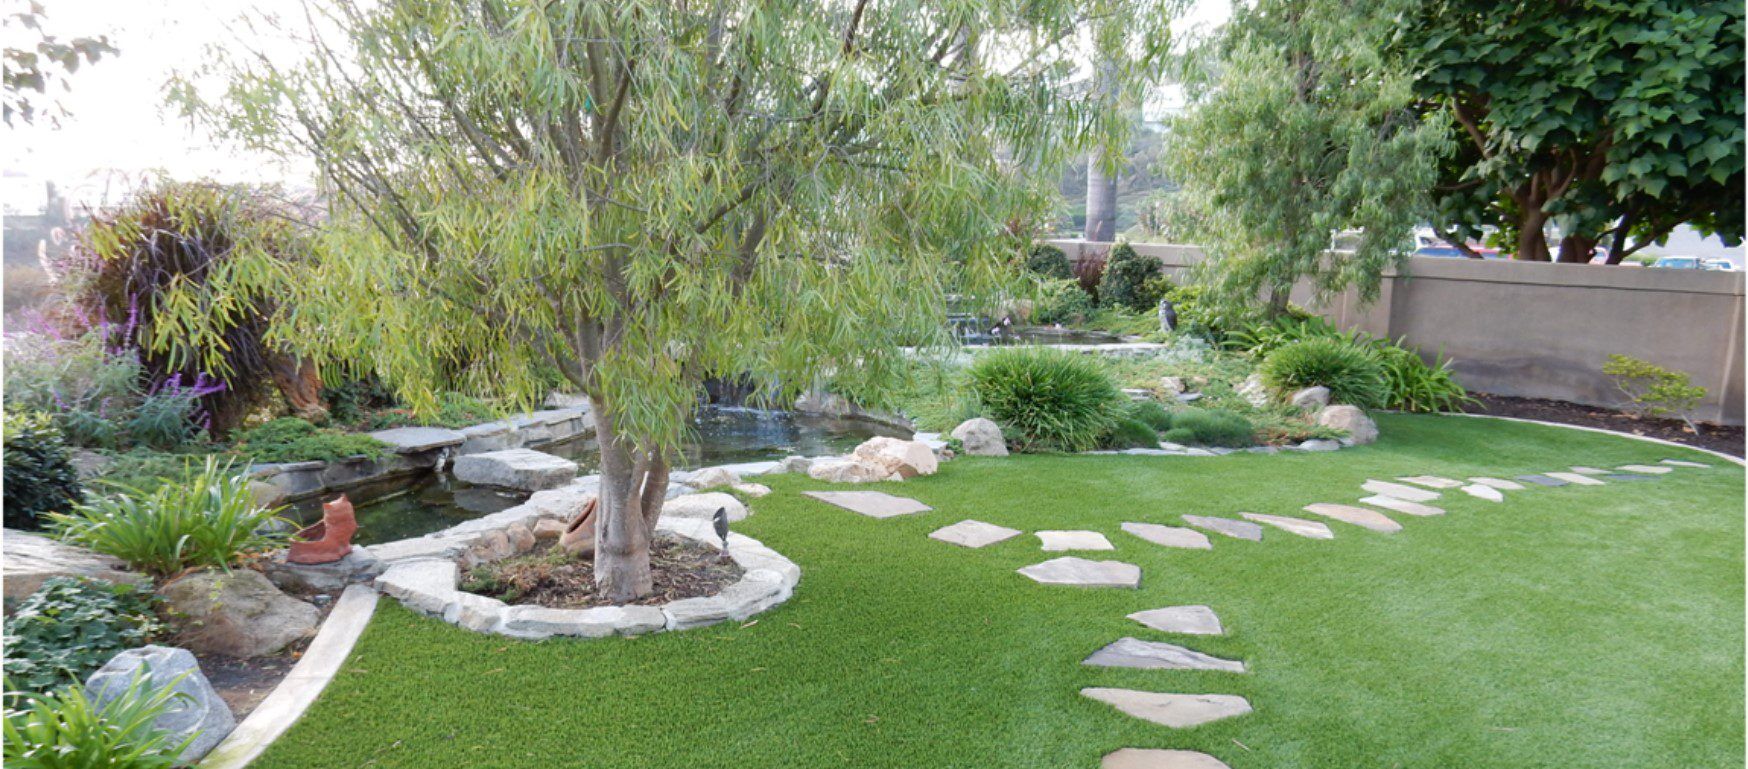 Artificial Turf Irvine Green-R Turf Artificial Grass Landscapes